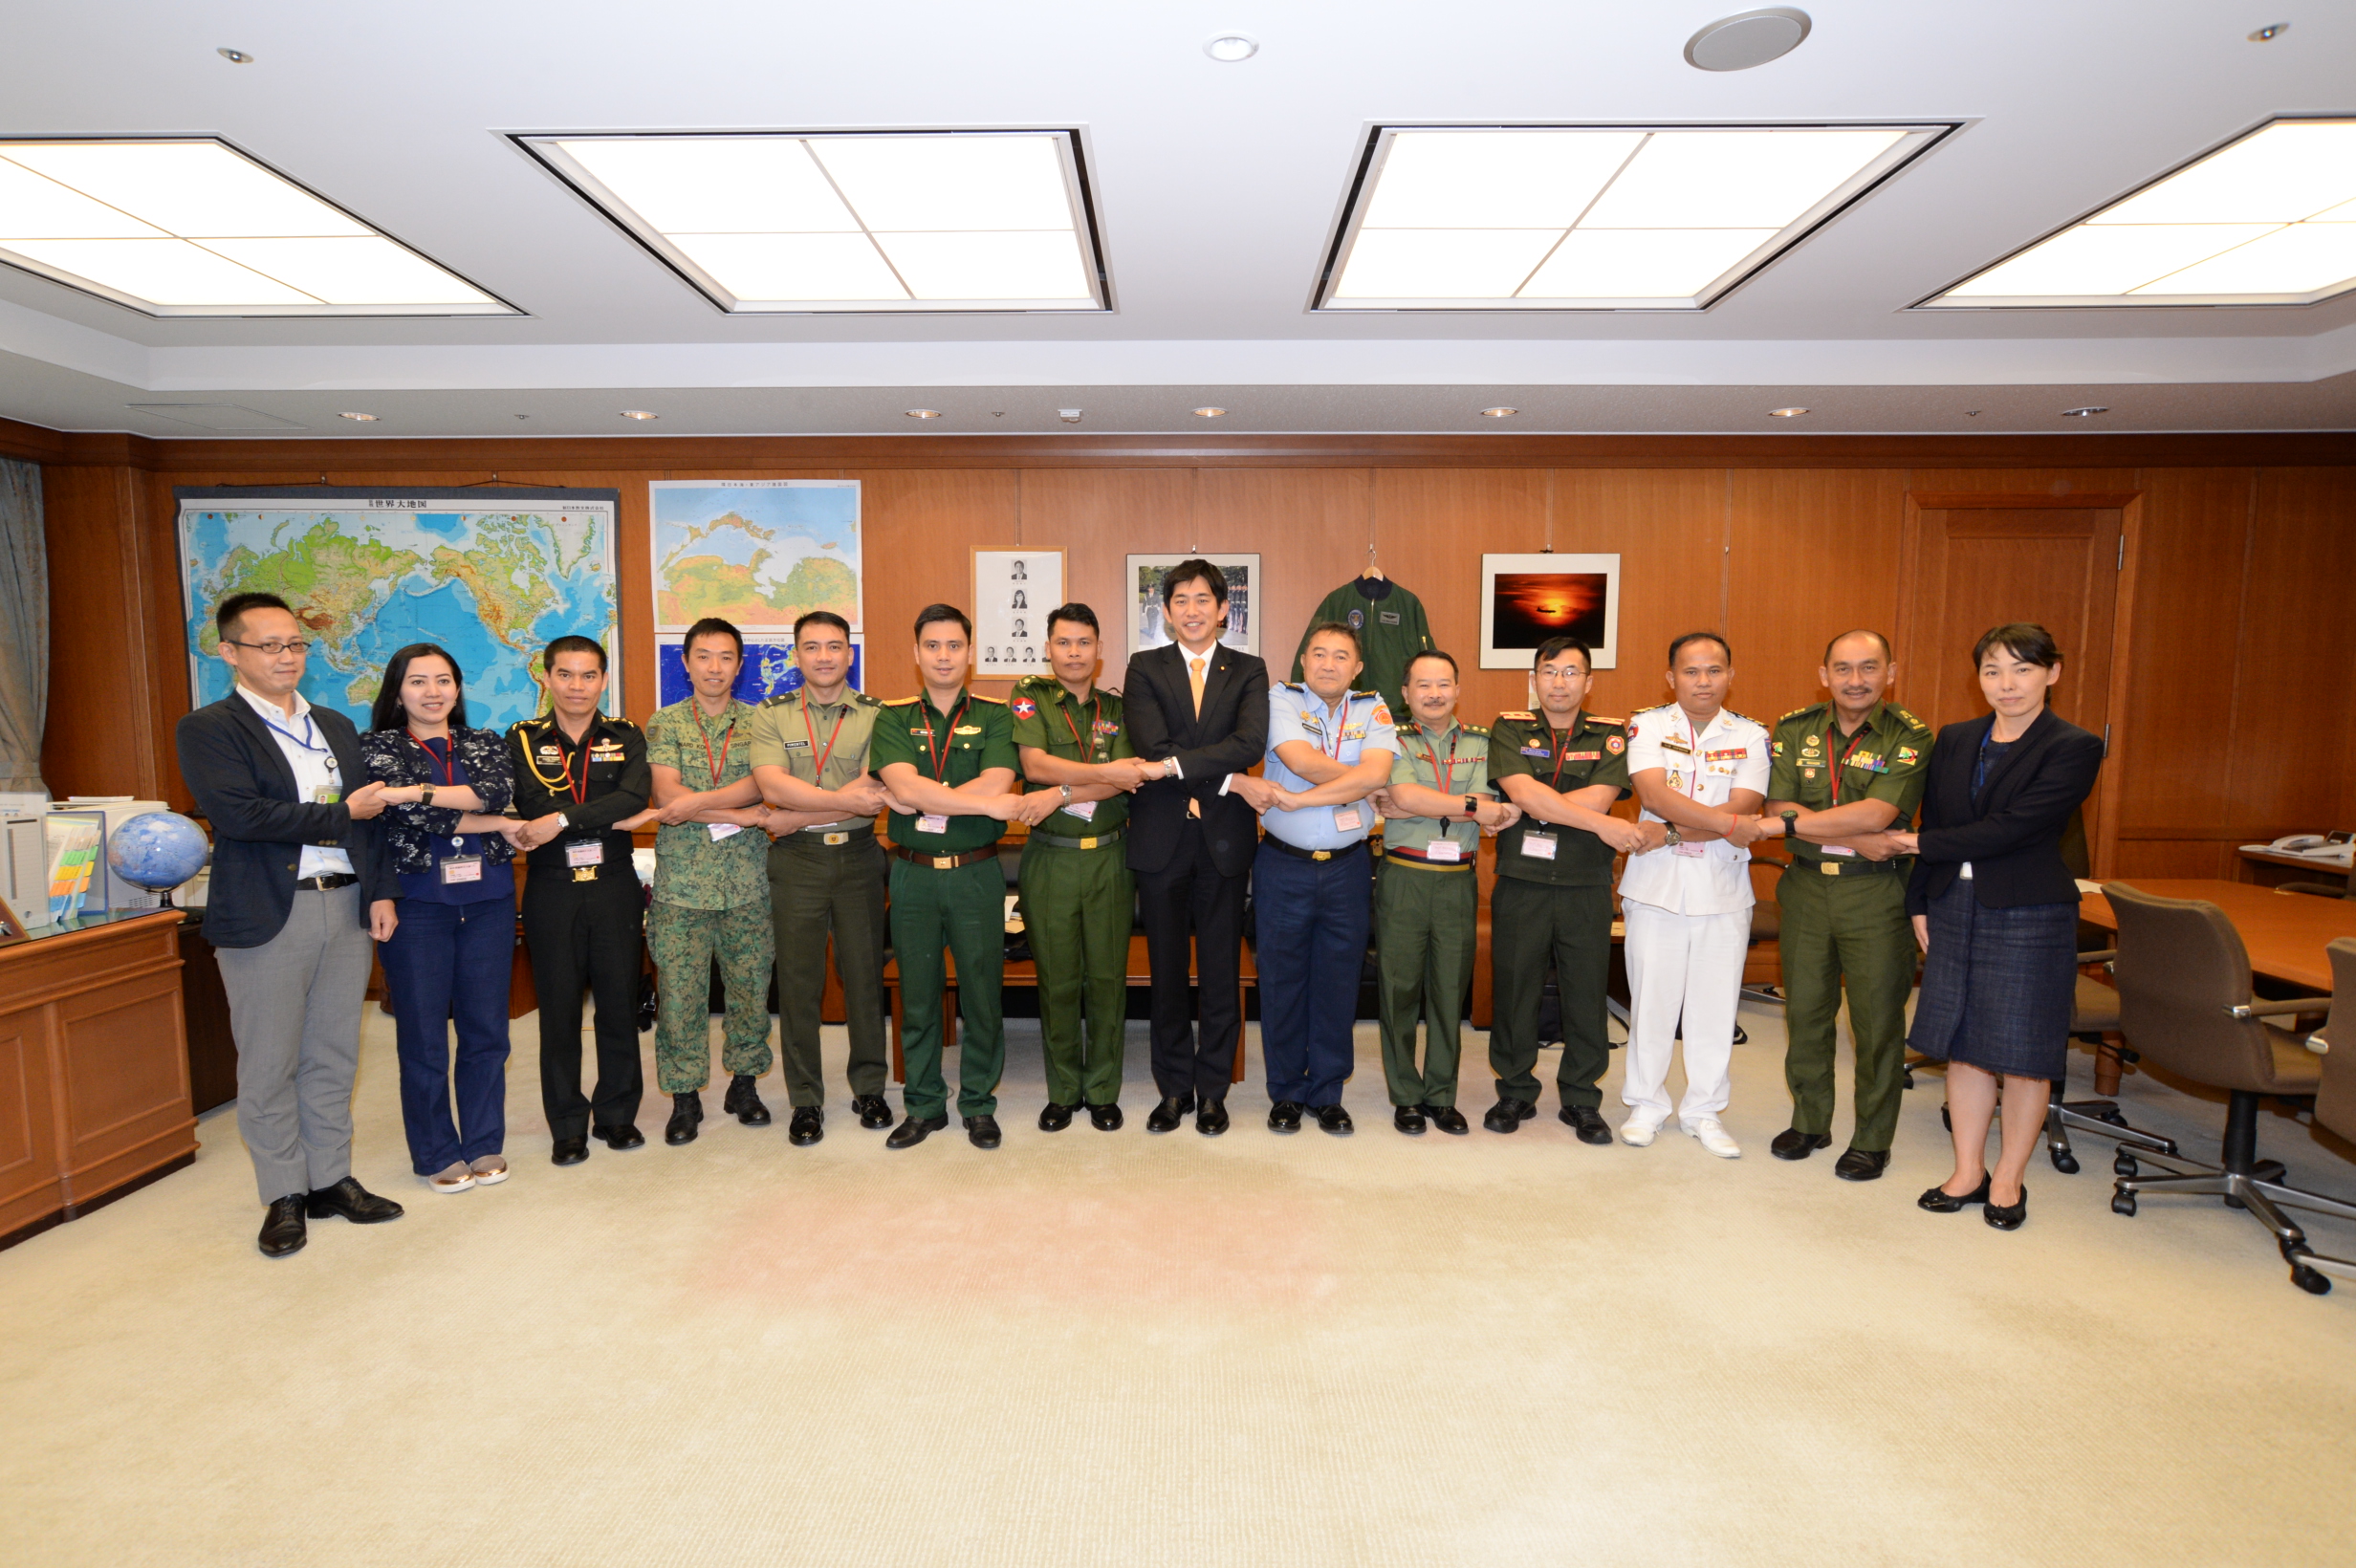 Japan-ASEAN Joint Exercise for Rescue (JXR) Observation Program（平成２９年６月２０日～２３日：市ヶ谷、朝霞、御殿場地区等）